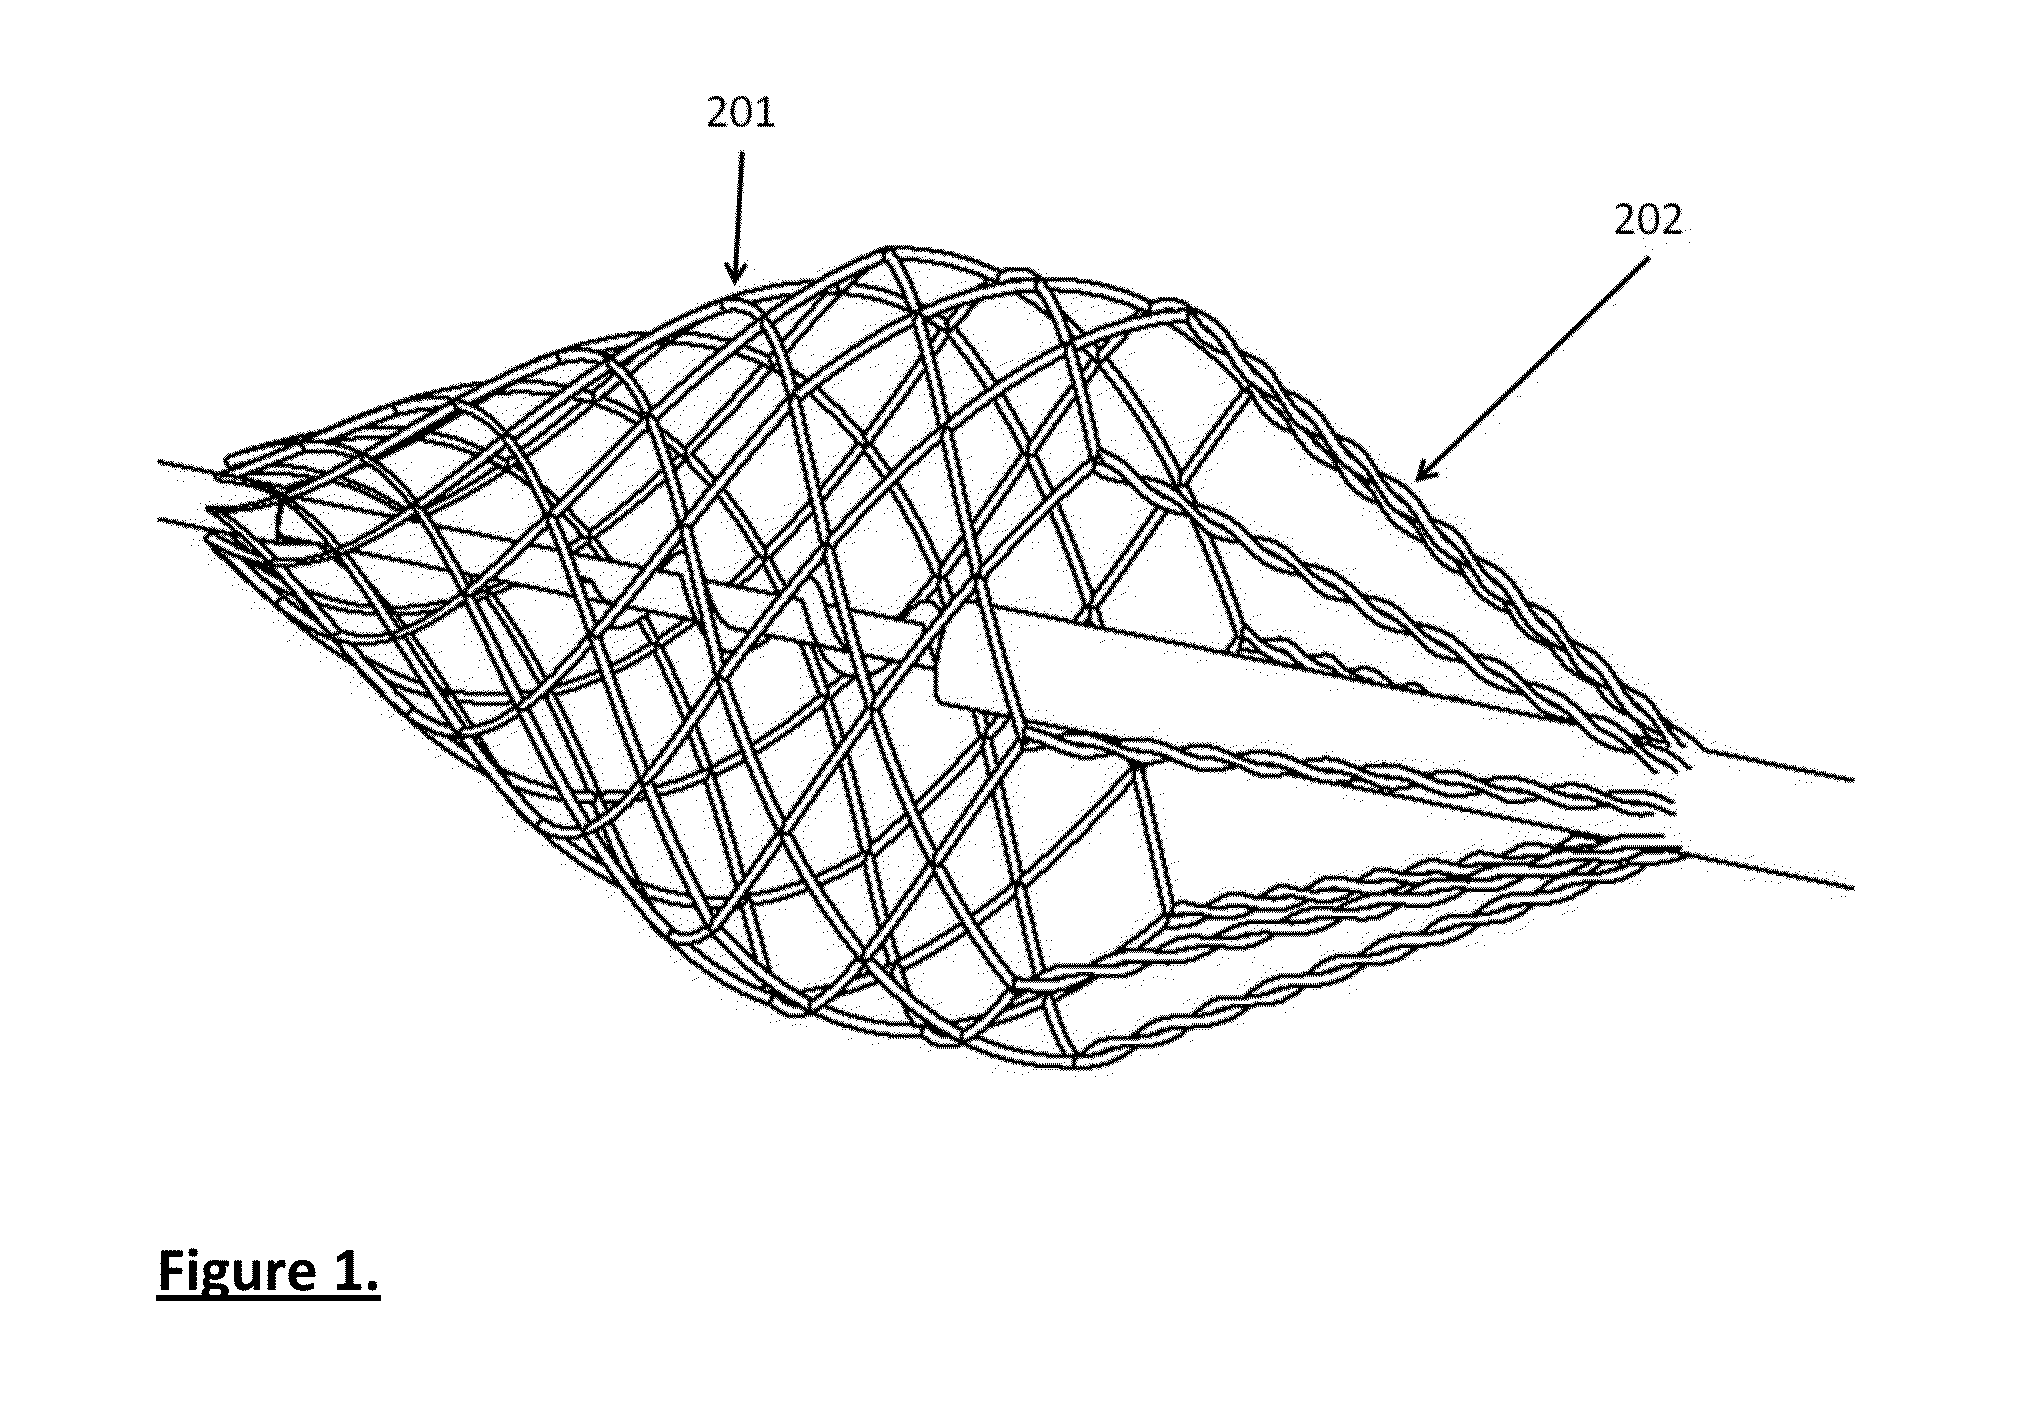 Device suitable for removing matter from inside the lumen and the wall of a body lumen